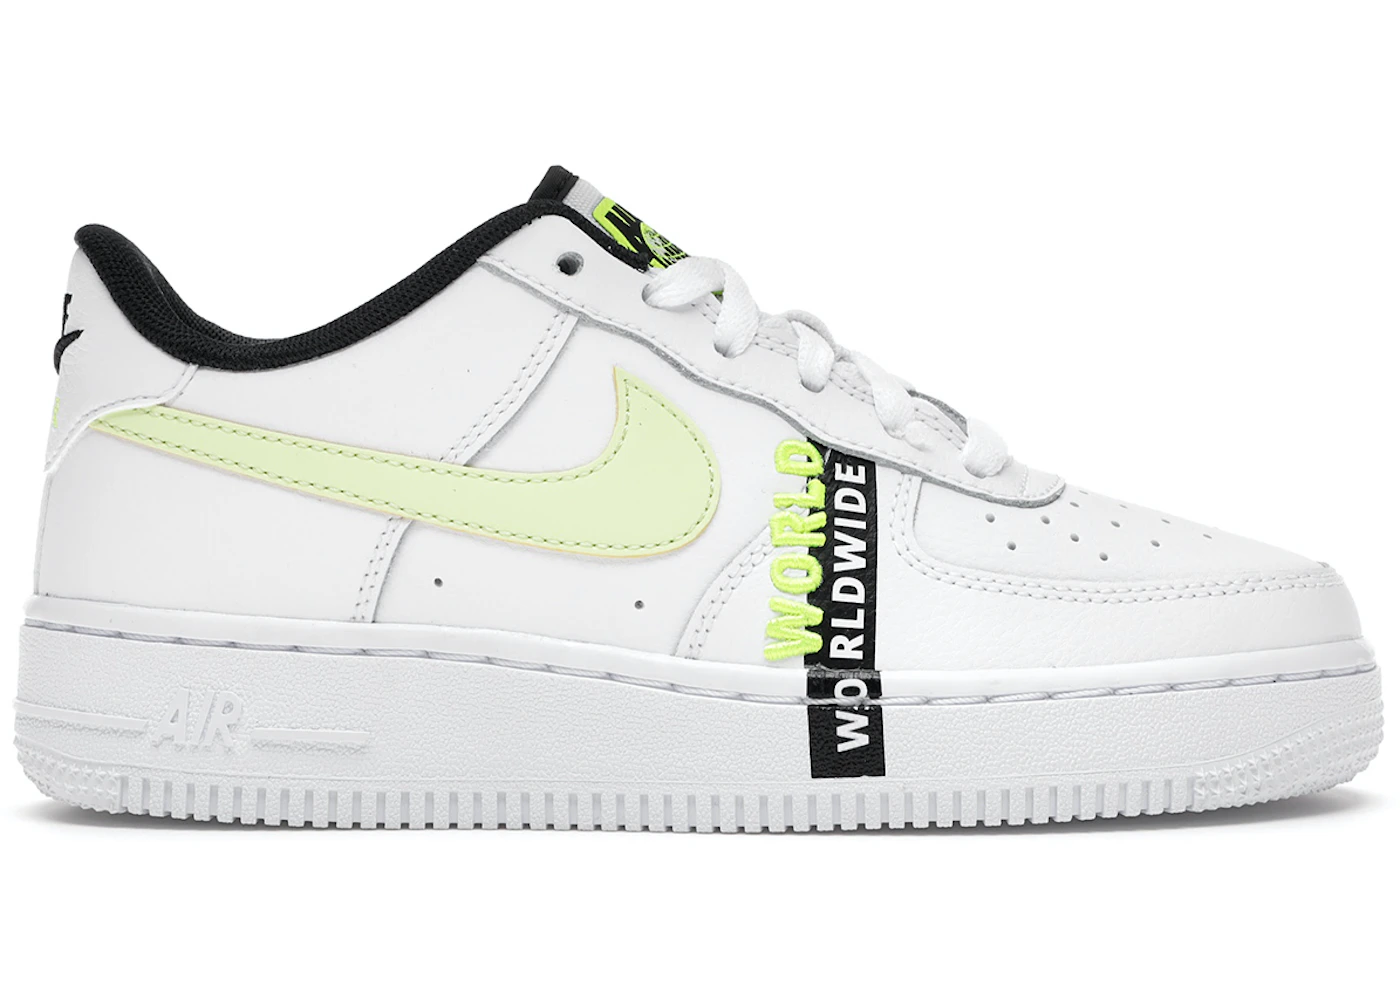 Prophecy Passive domain Nike Air Force 1 Low Worldwide White Barely Volt (GS) - CN8536-100 - US